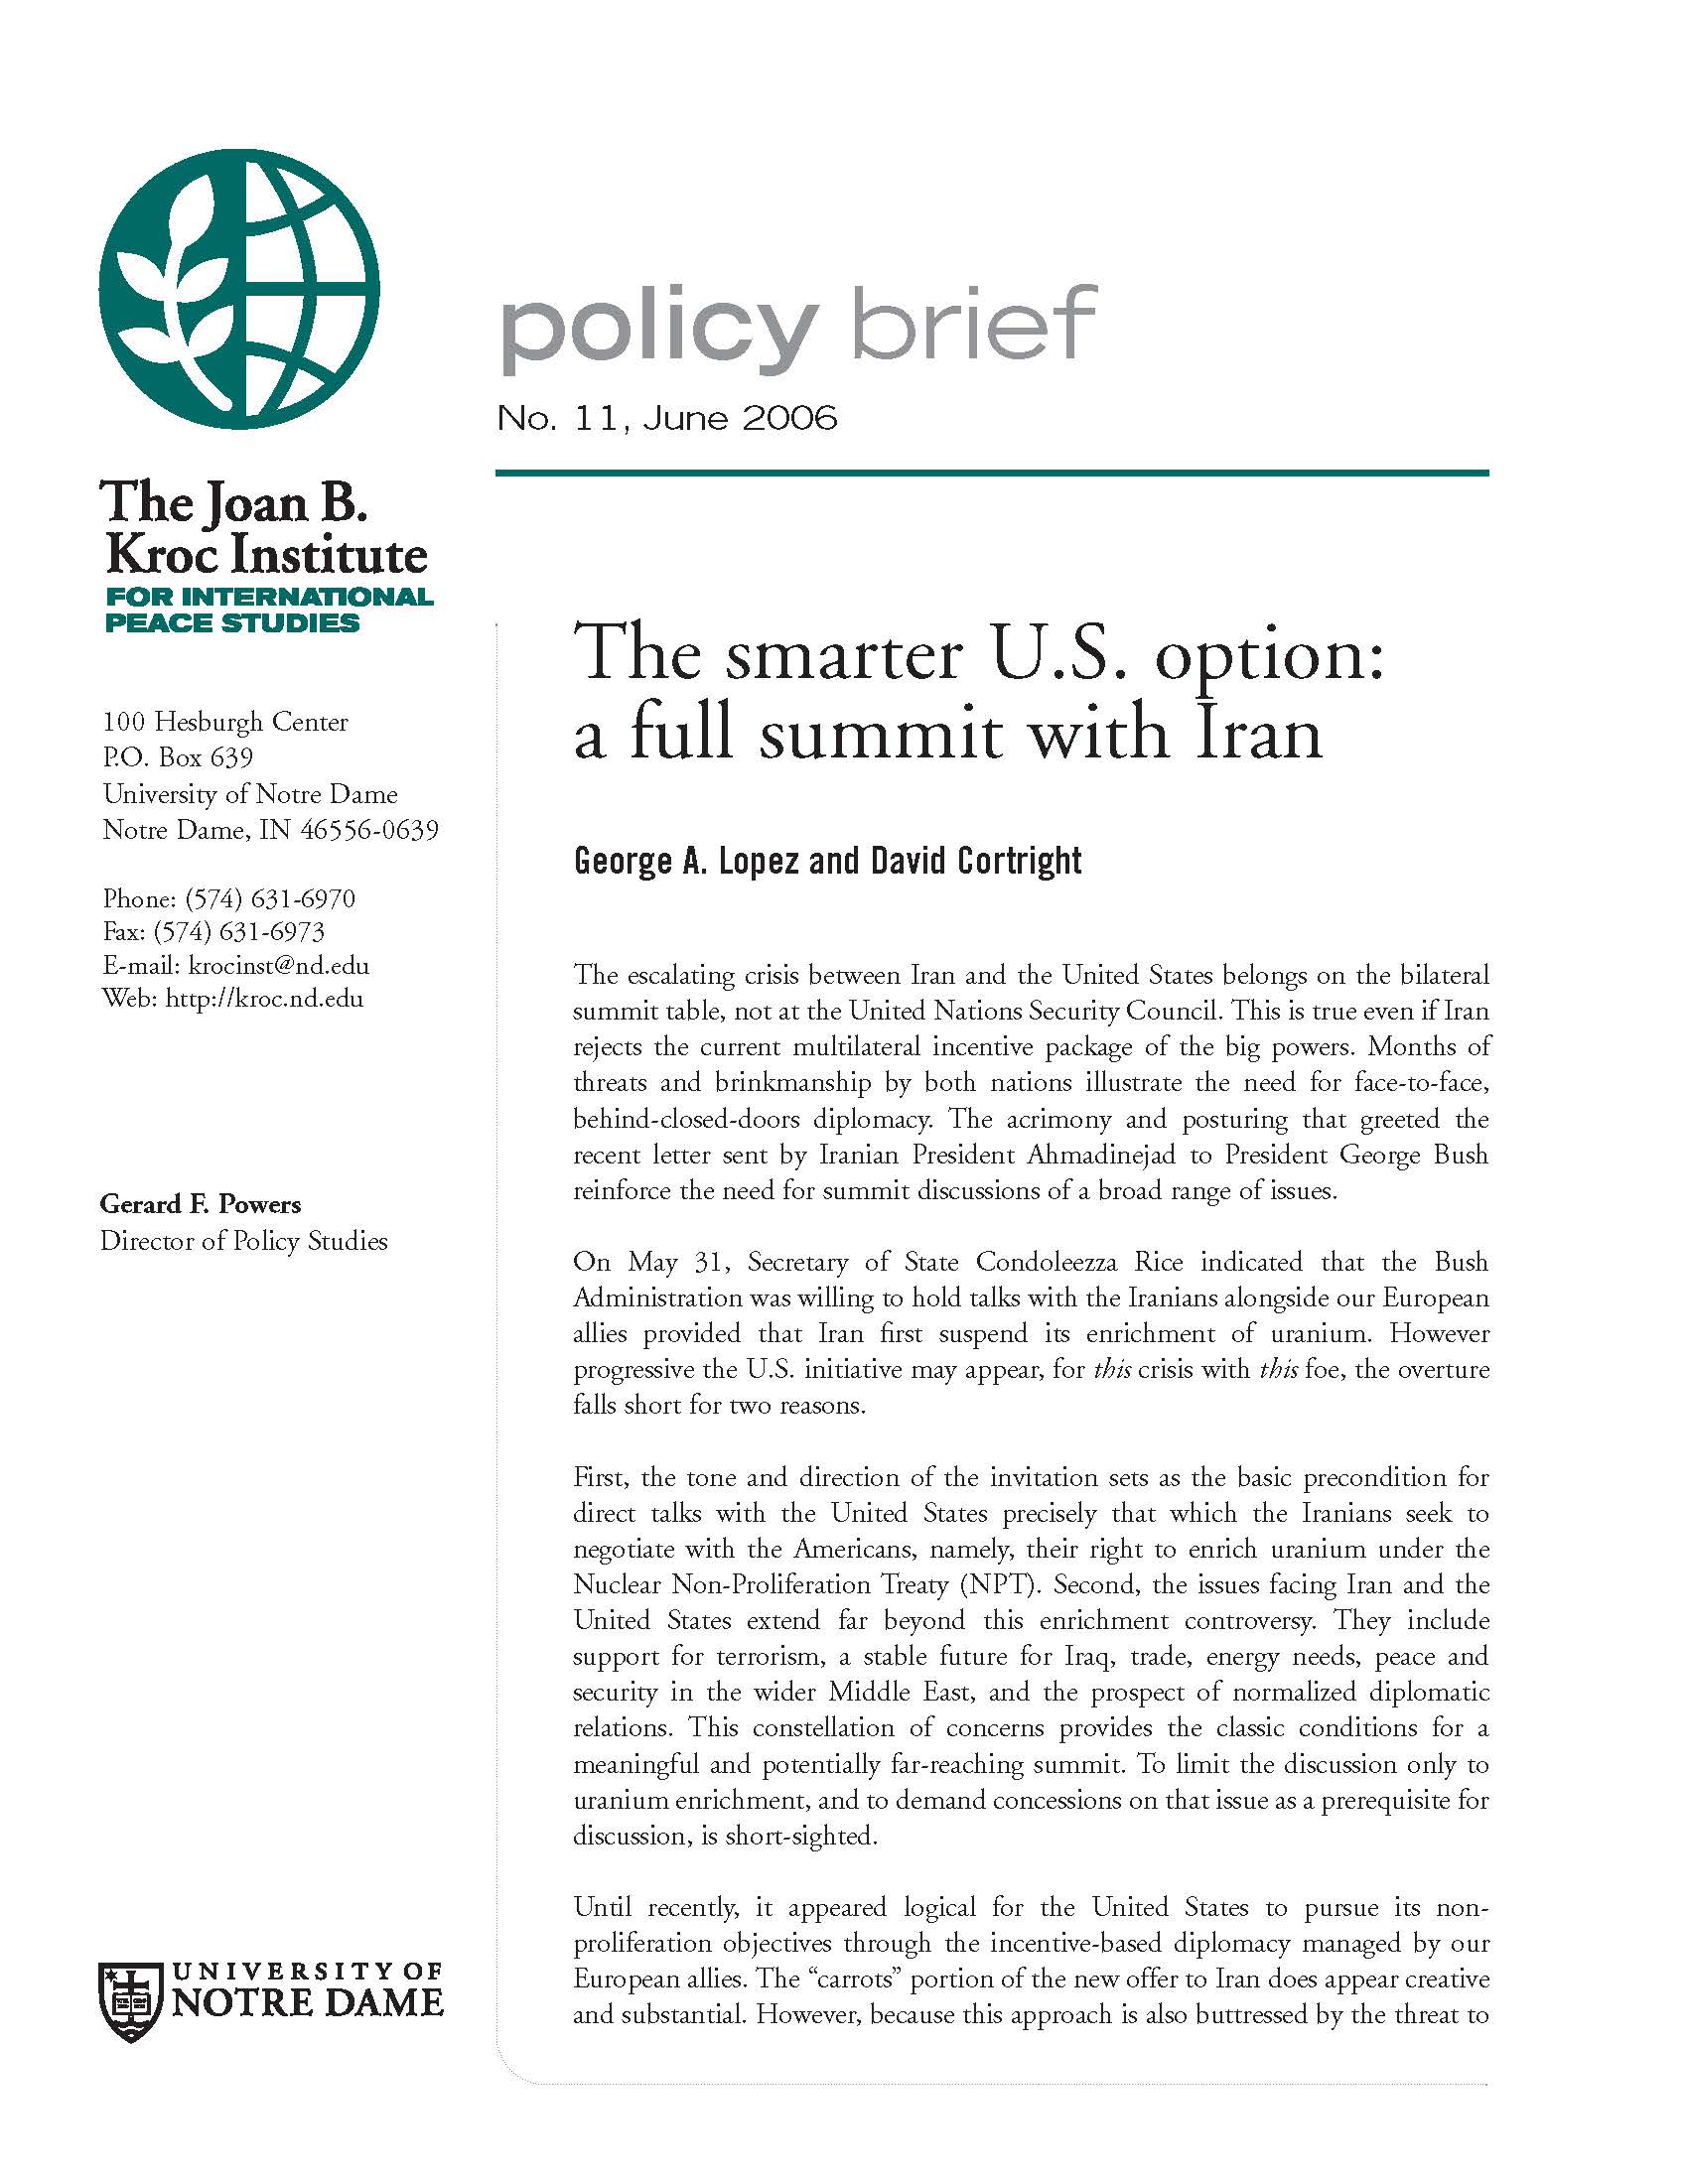 The Smarter U.S. Option: A Full Summit with Iran Policy Brief No. 11